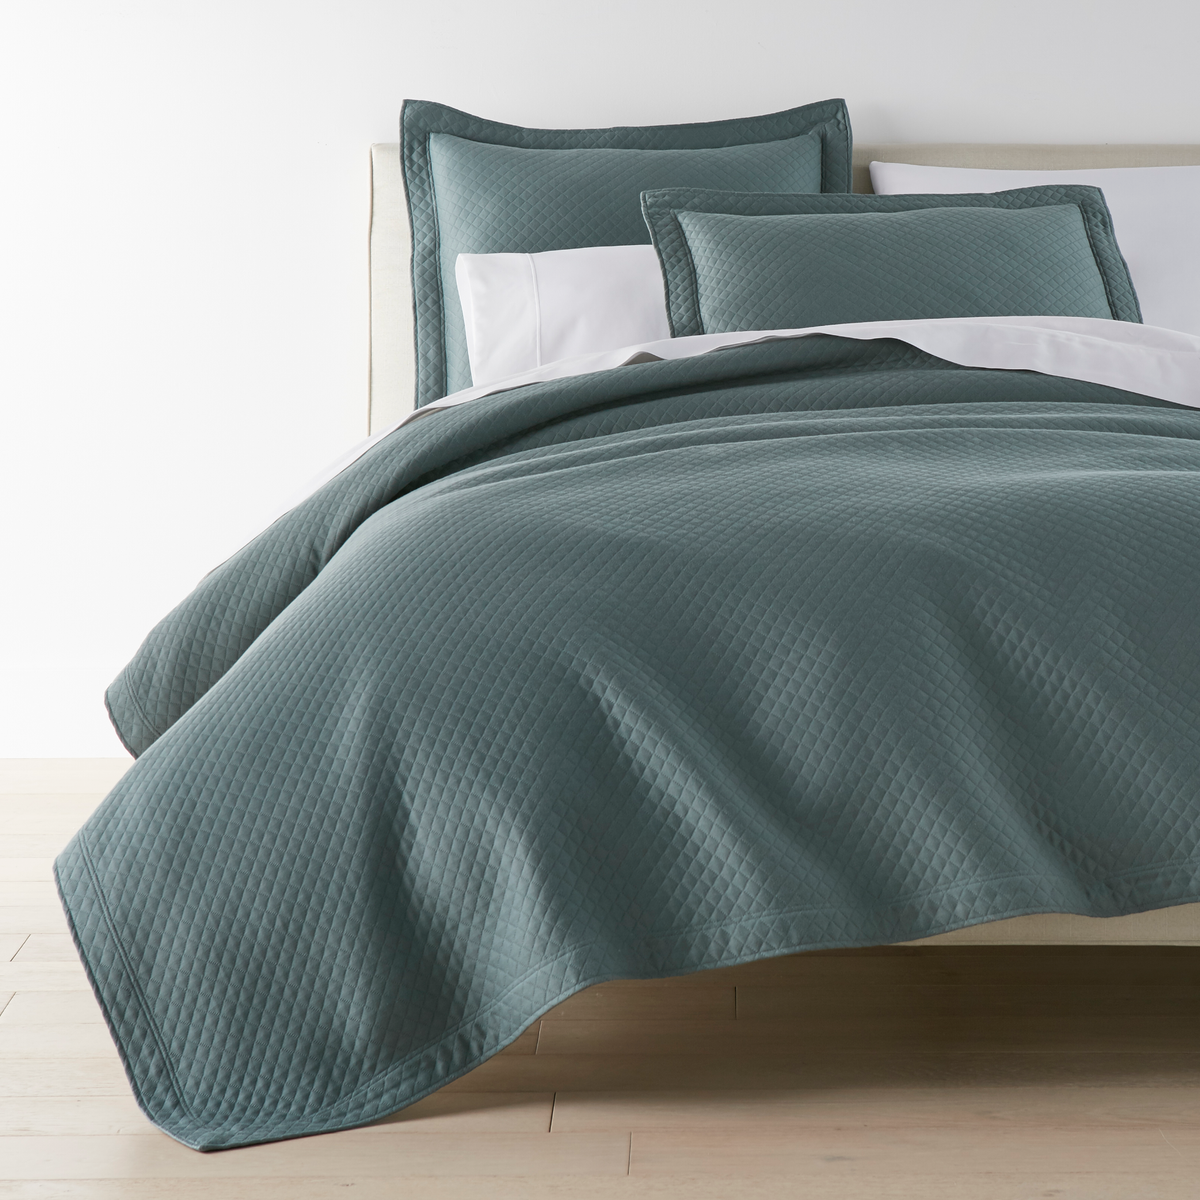 Full Bedding of Peacock Alley Oxford Matelassé Coverlets and Shams Collection Color Spruce